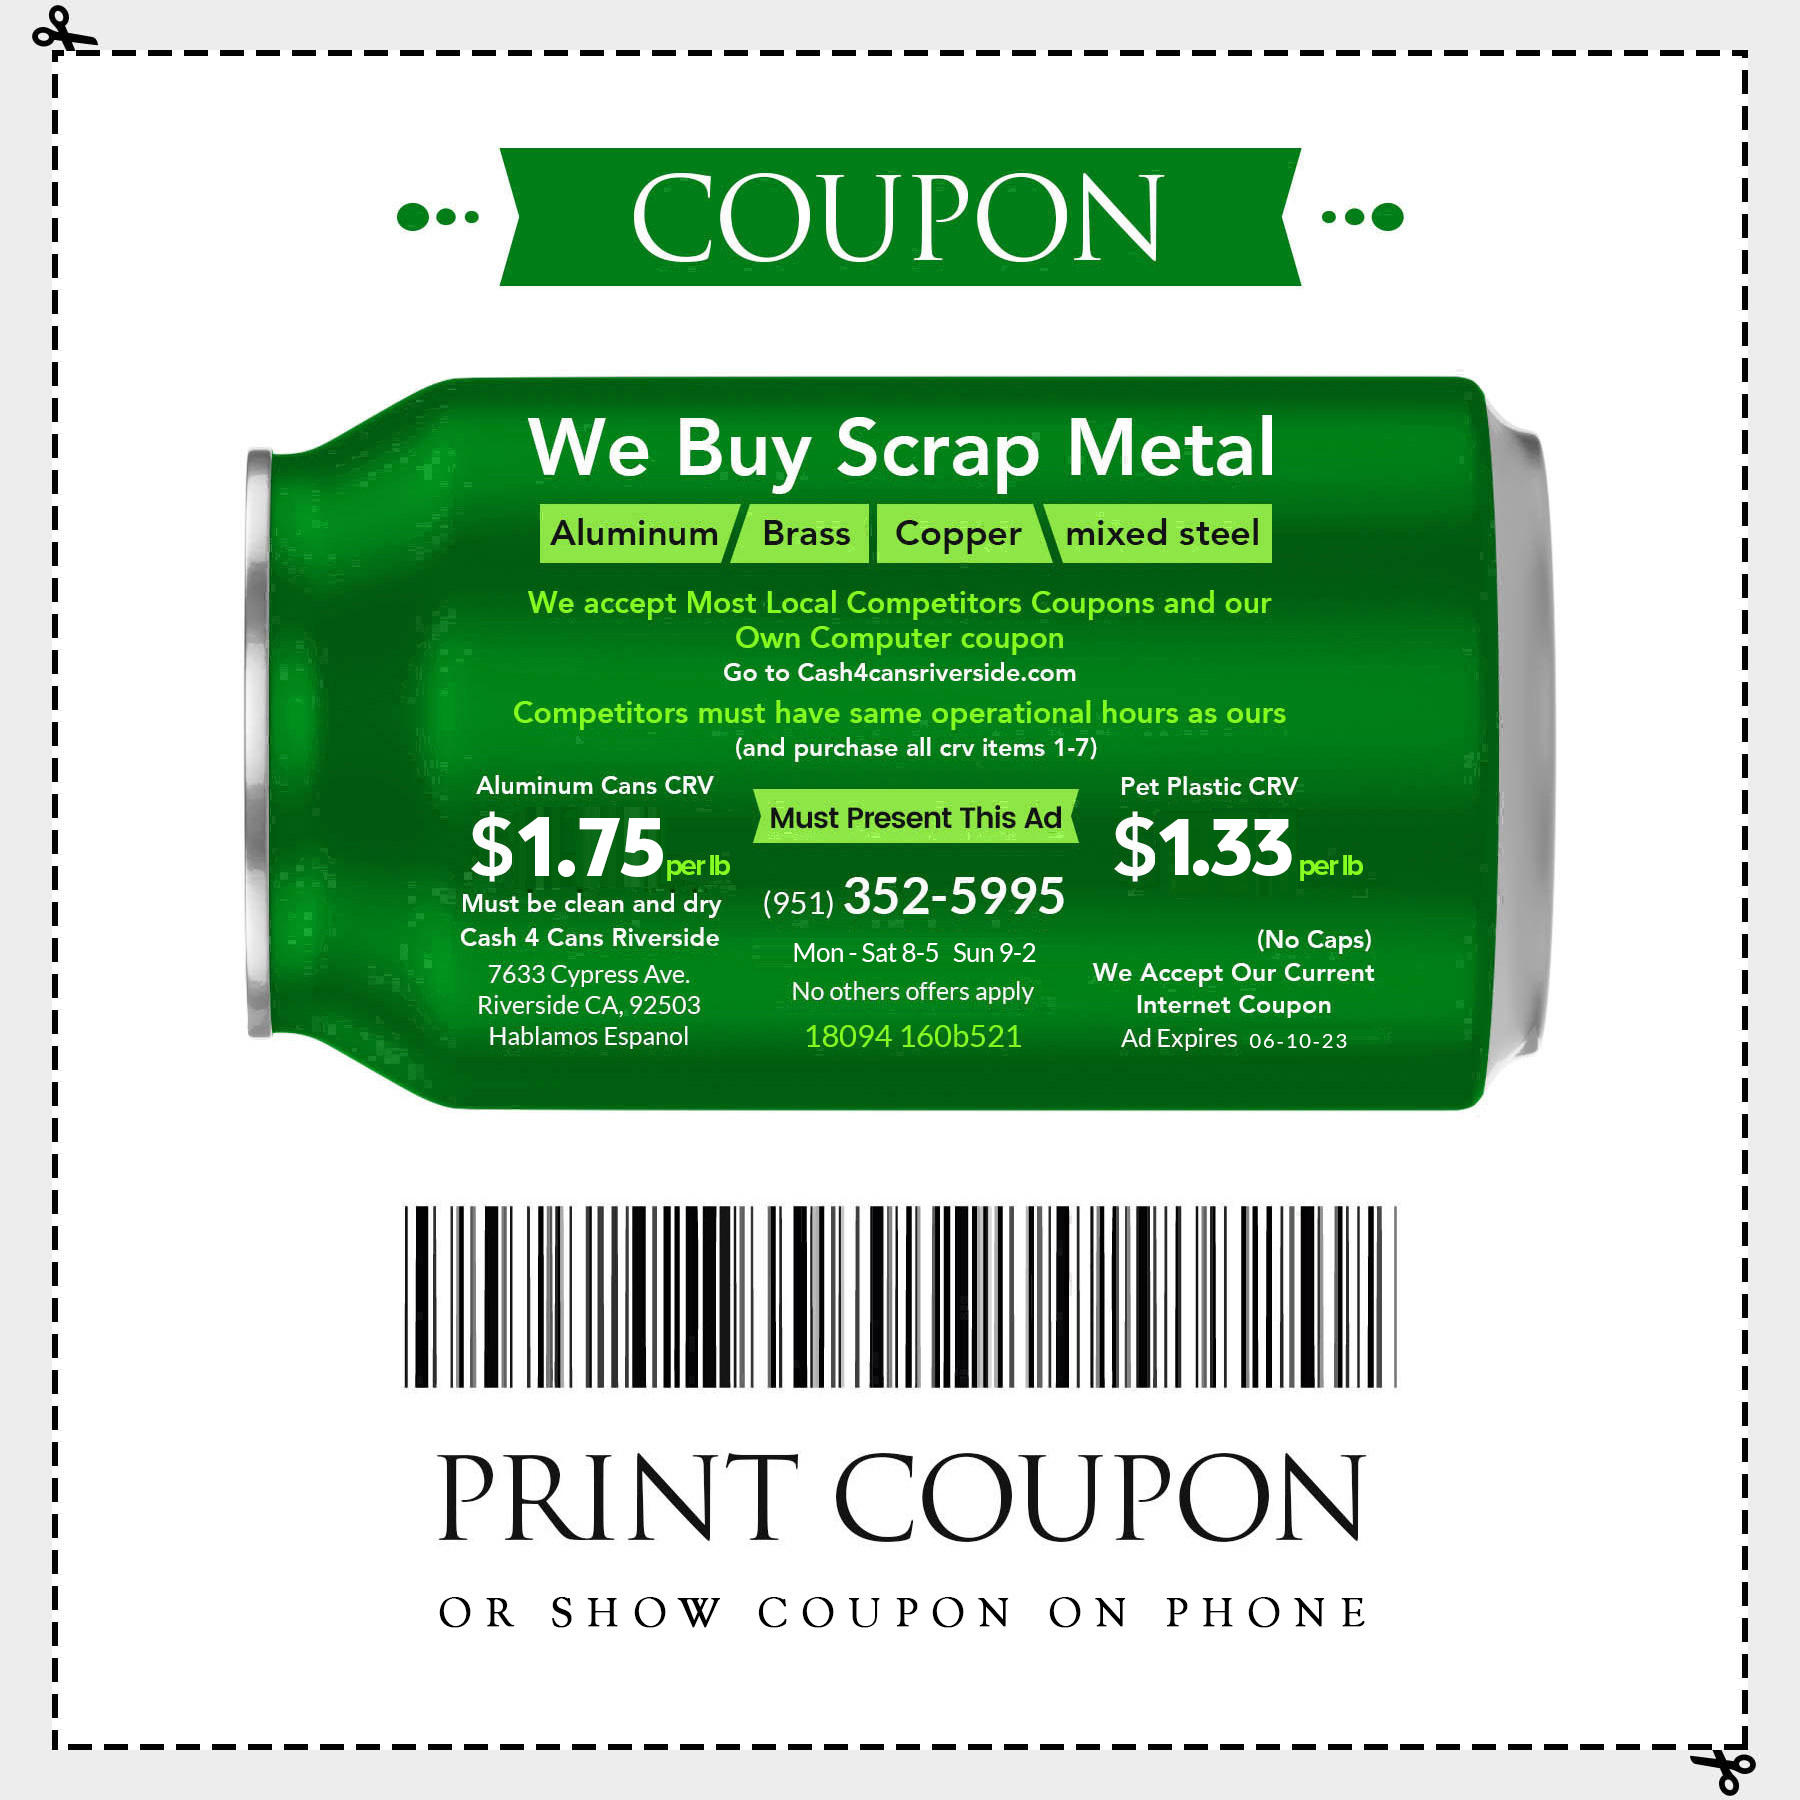 We buy scrap metal Aluminum, Brass, Copper, Mixed steel. We accept most local competitors coupons and our own computer coupon. Competitors must have same operational hours as ours (and purchase all crv items 1-7). One Must present this add. Aluminum Cans CRV $1.75 per lb and Pet Plastic CRV $1.33 per lb.